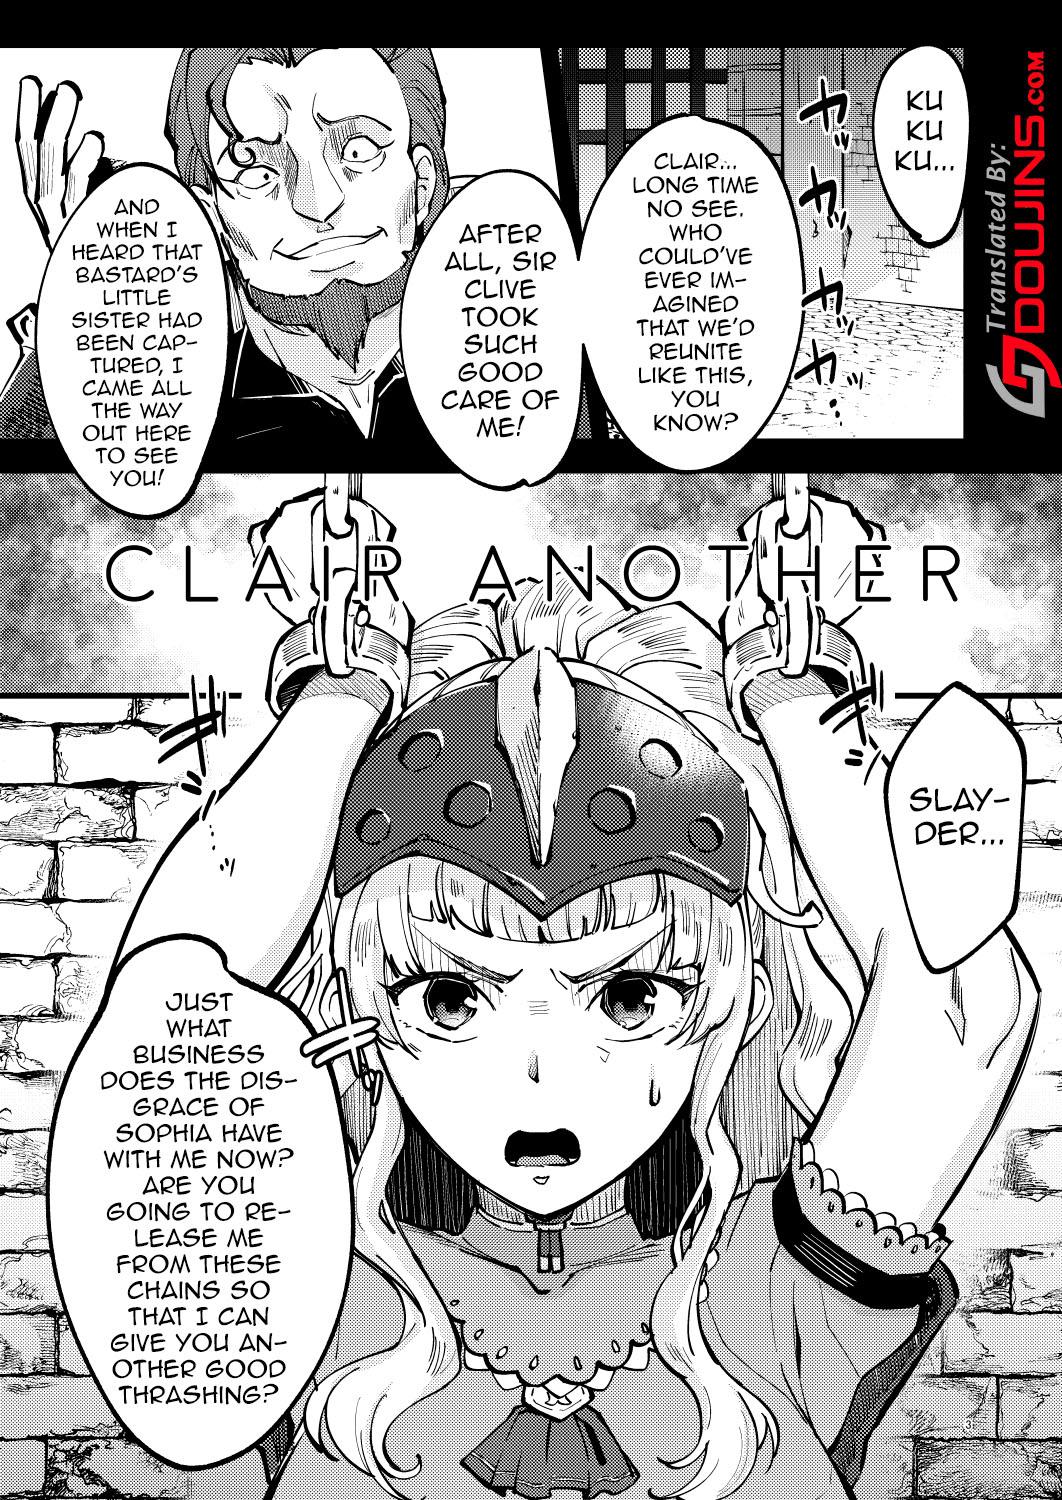 Brazilian CLAIR ANOTHER - Fire emblem gaiden Submissive - Page 3